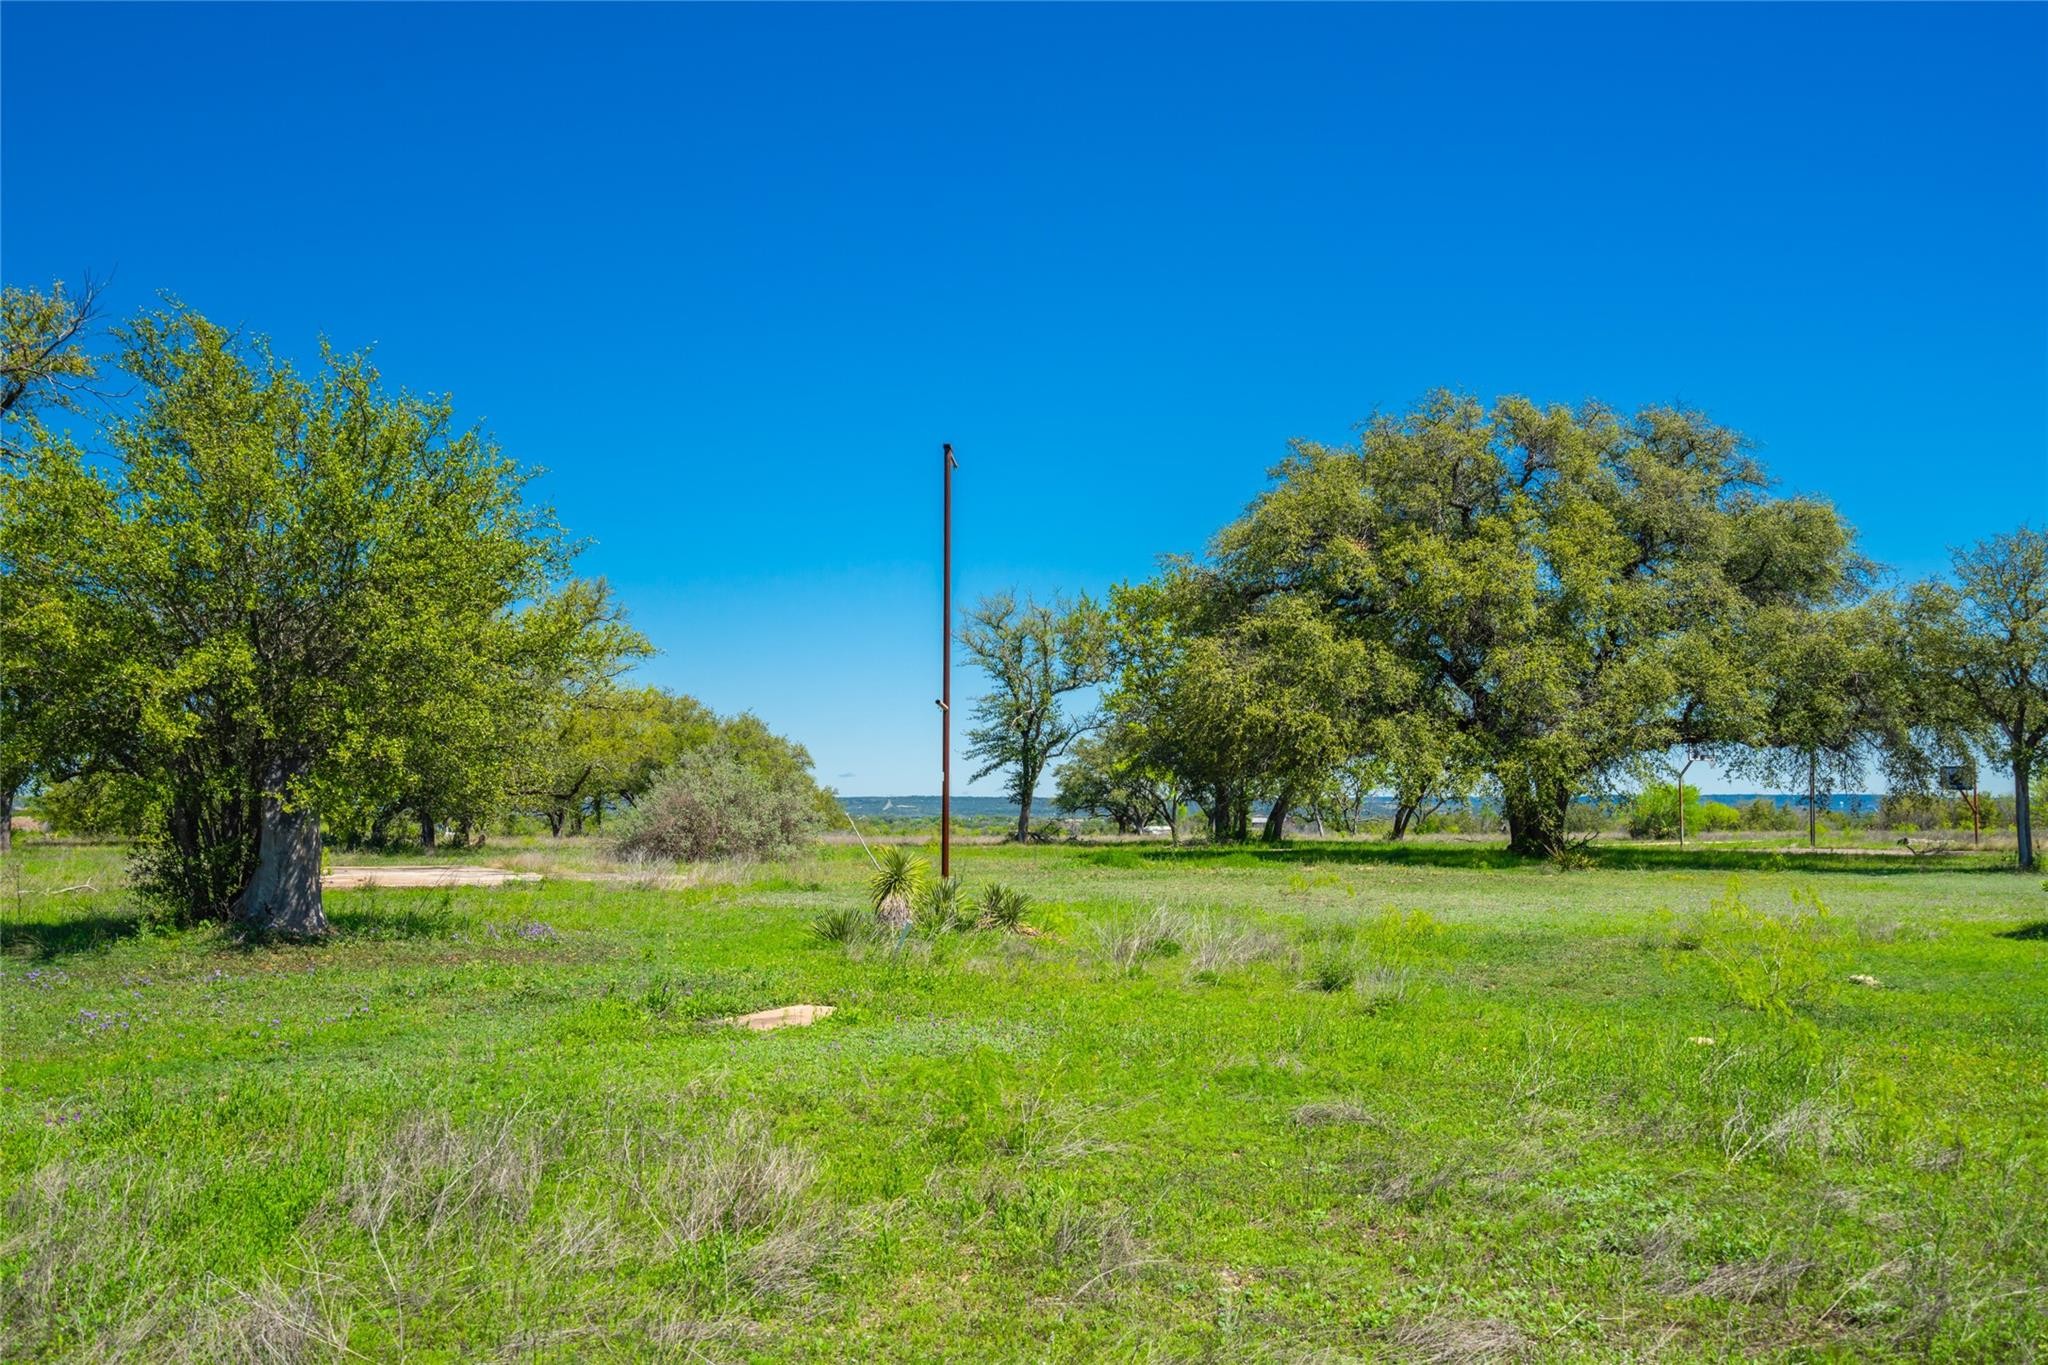 3. Tbd Paleface Ranch Rd